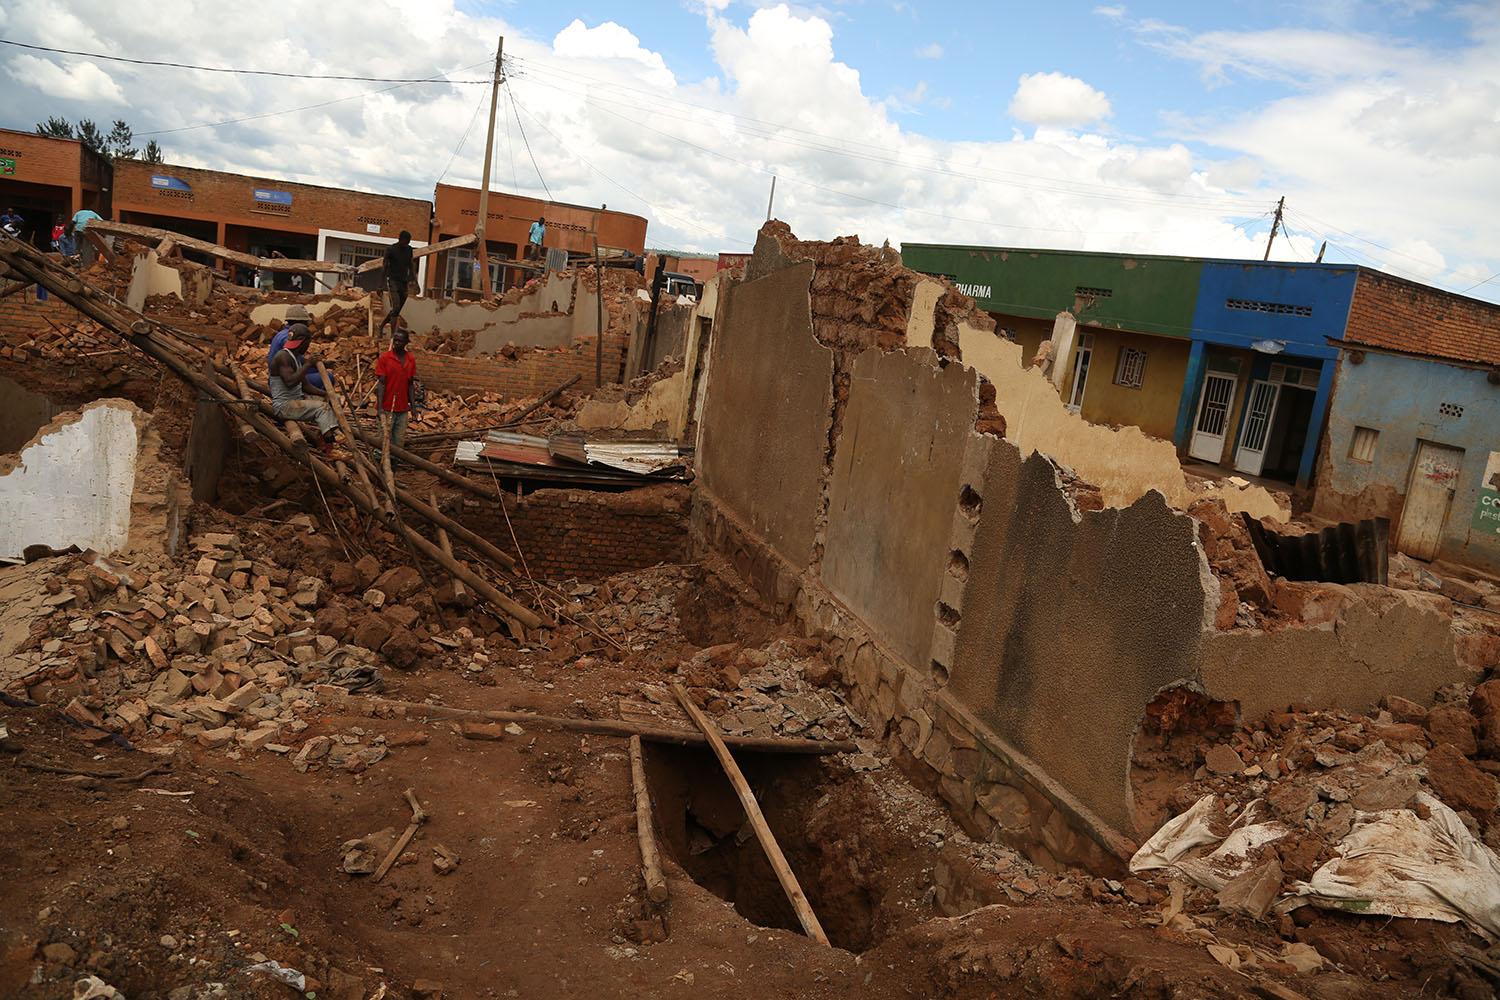 Some of the houses that were demolished recently in Kabeza village, Kabuga I cell in Rusororo Sector, Gasabo District, in order to exhume remains of Genocide victims from the graves where they were dumped 24 years ago. File.